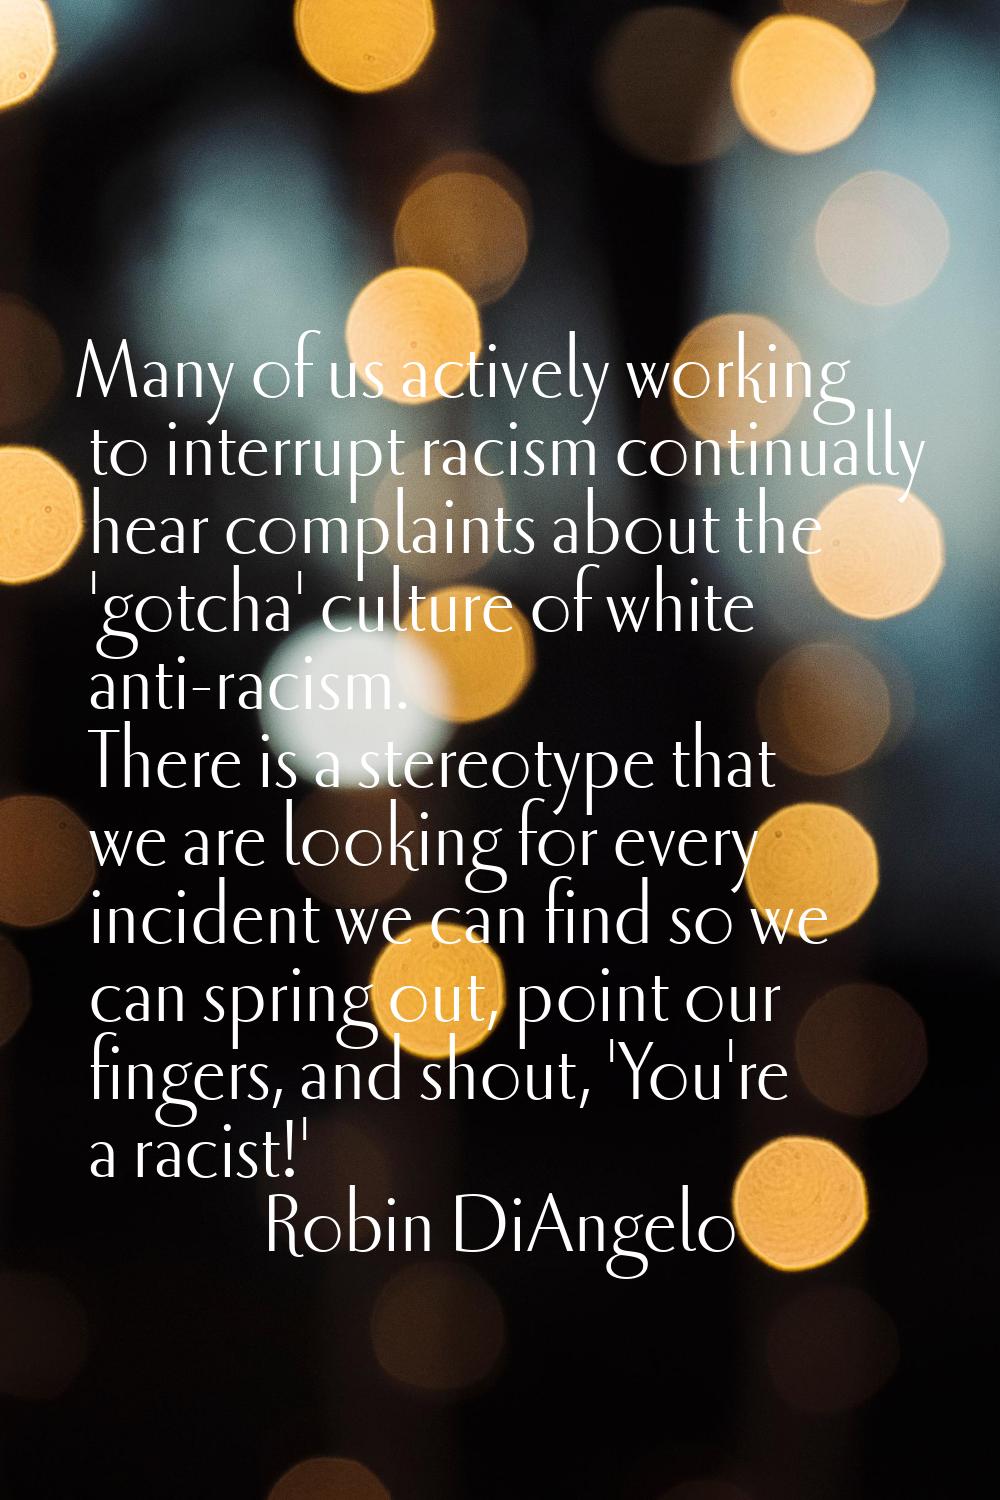 Many of us actively working to interrupt racism continually hear complaints about the 'gotcha' cult